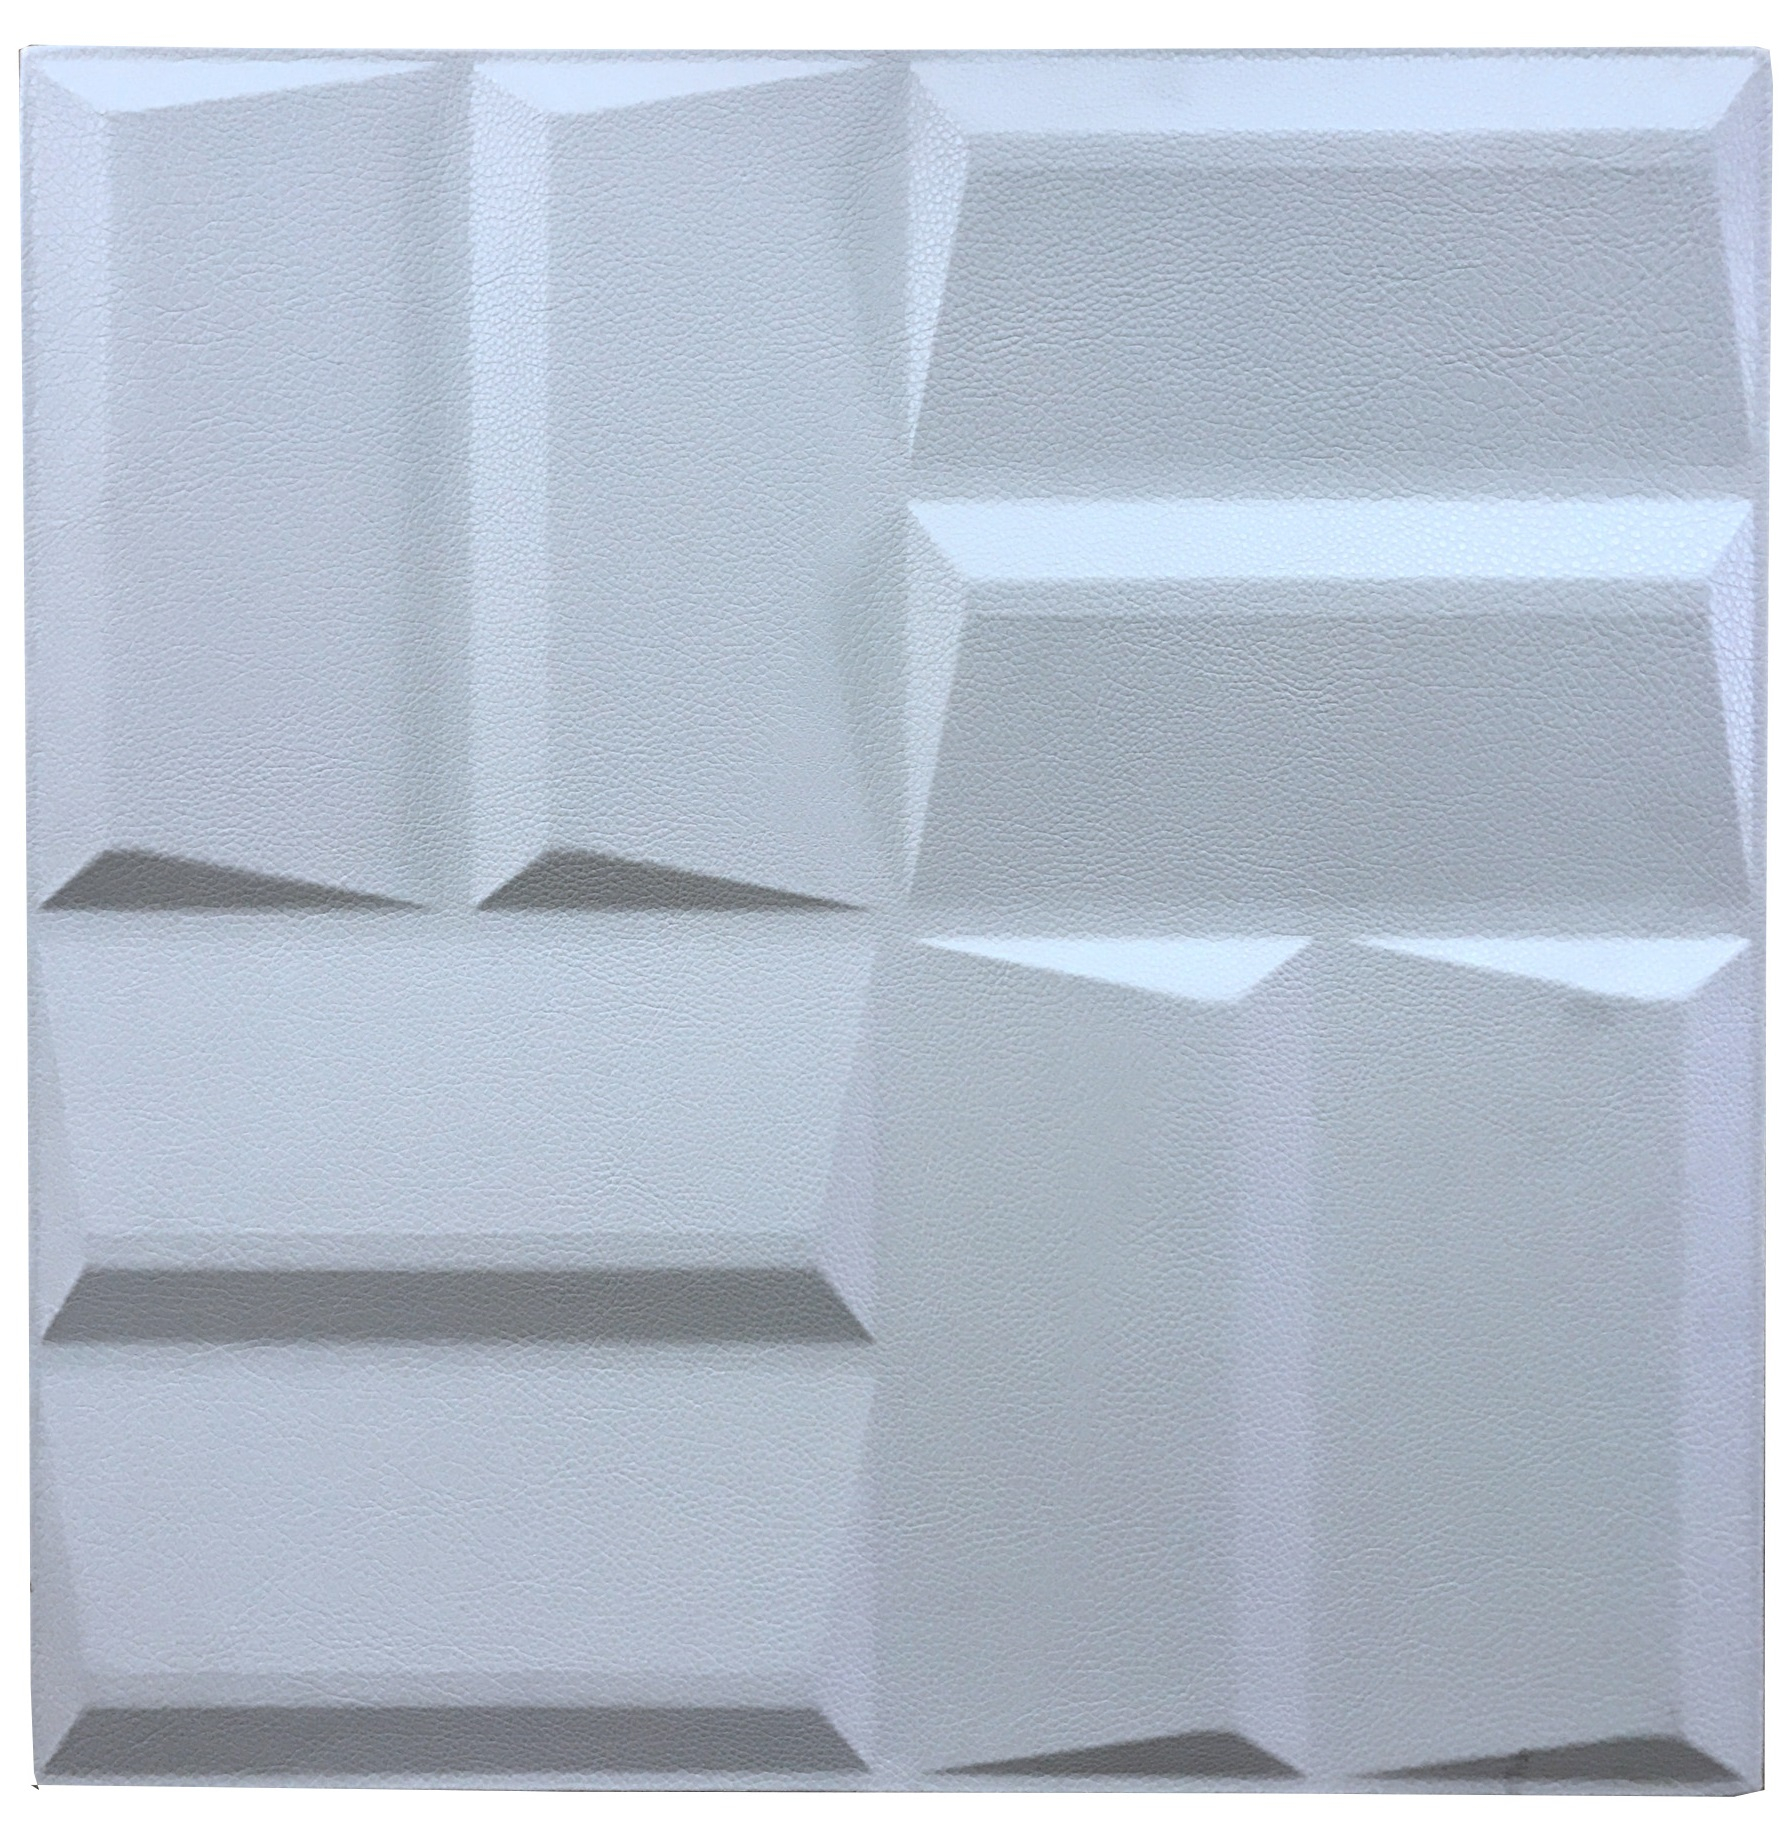 Soft White Sound Reflection 3D Wall Panel